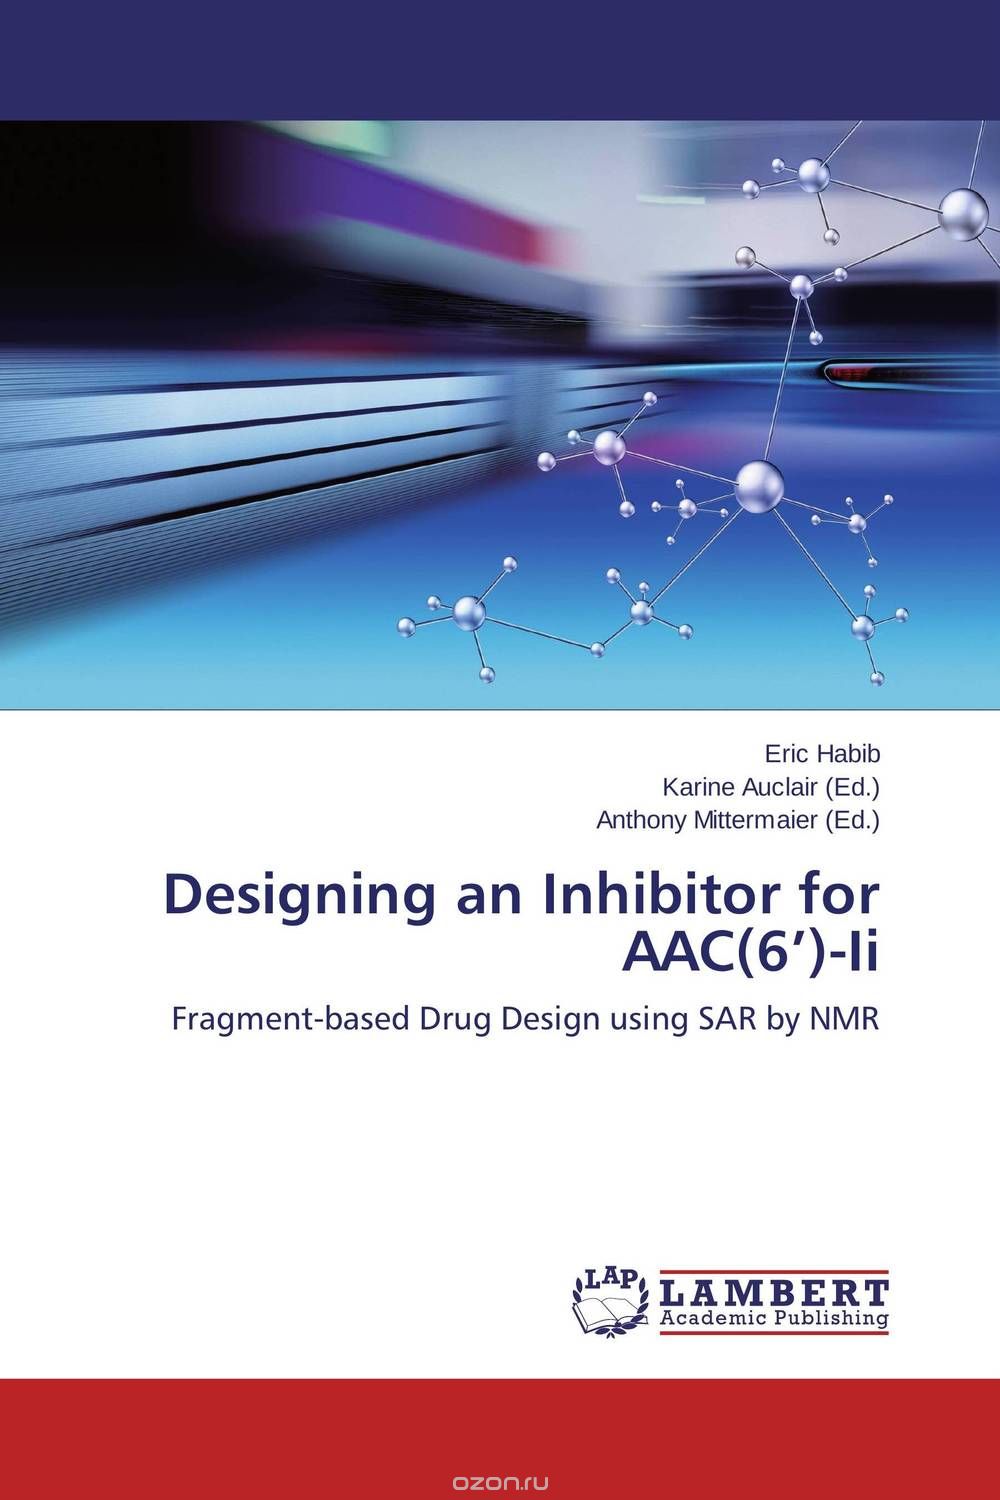 Designing an Inhibitor for AAC(6’)-Ii